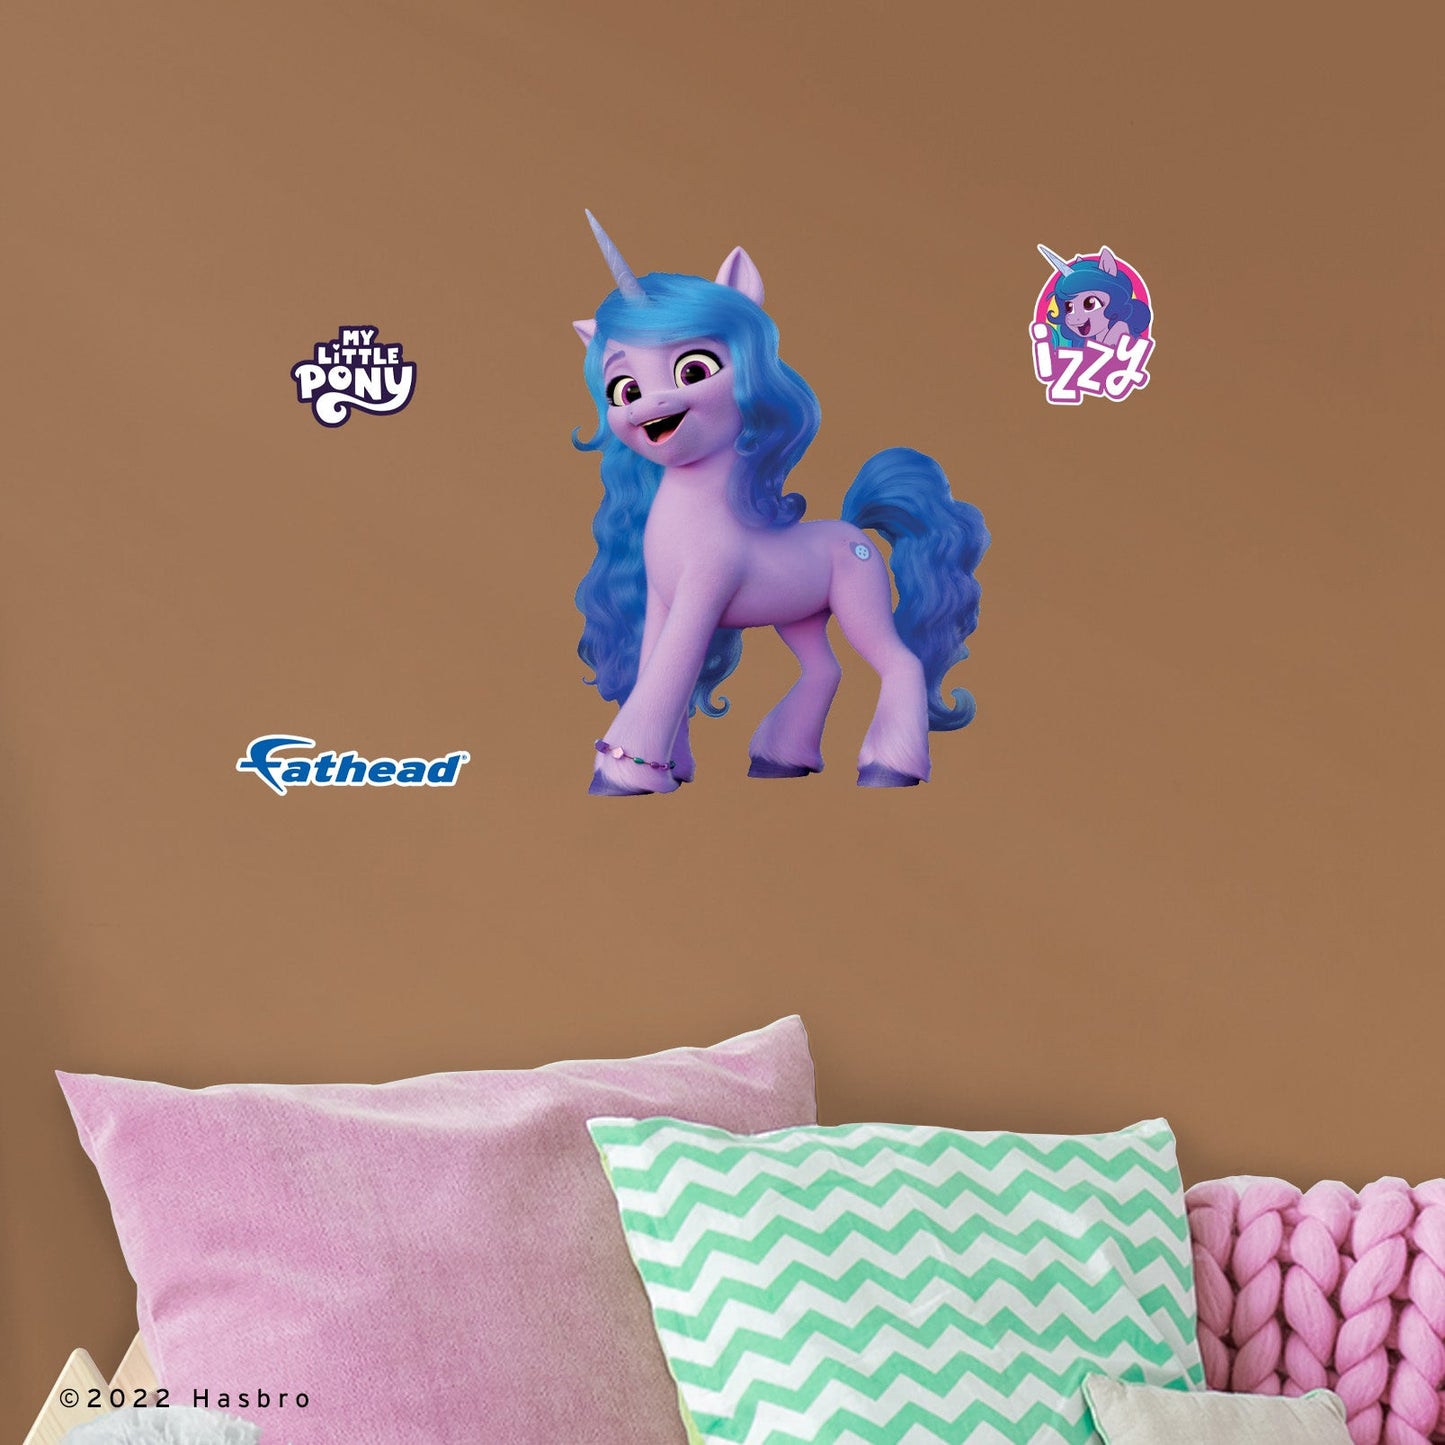 My Little Pony Movie 2: Izzy RealBig - Officially Licensed Hasbro Removable Adhesive Decal